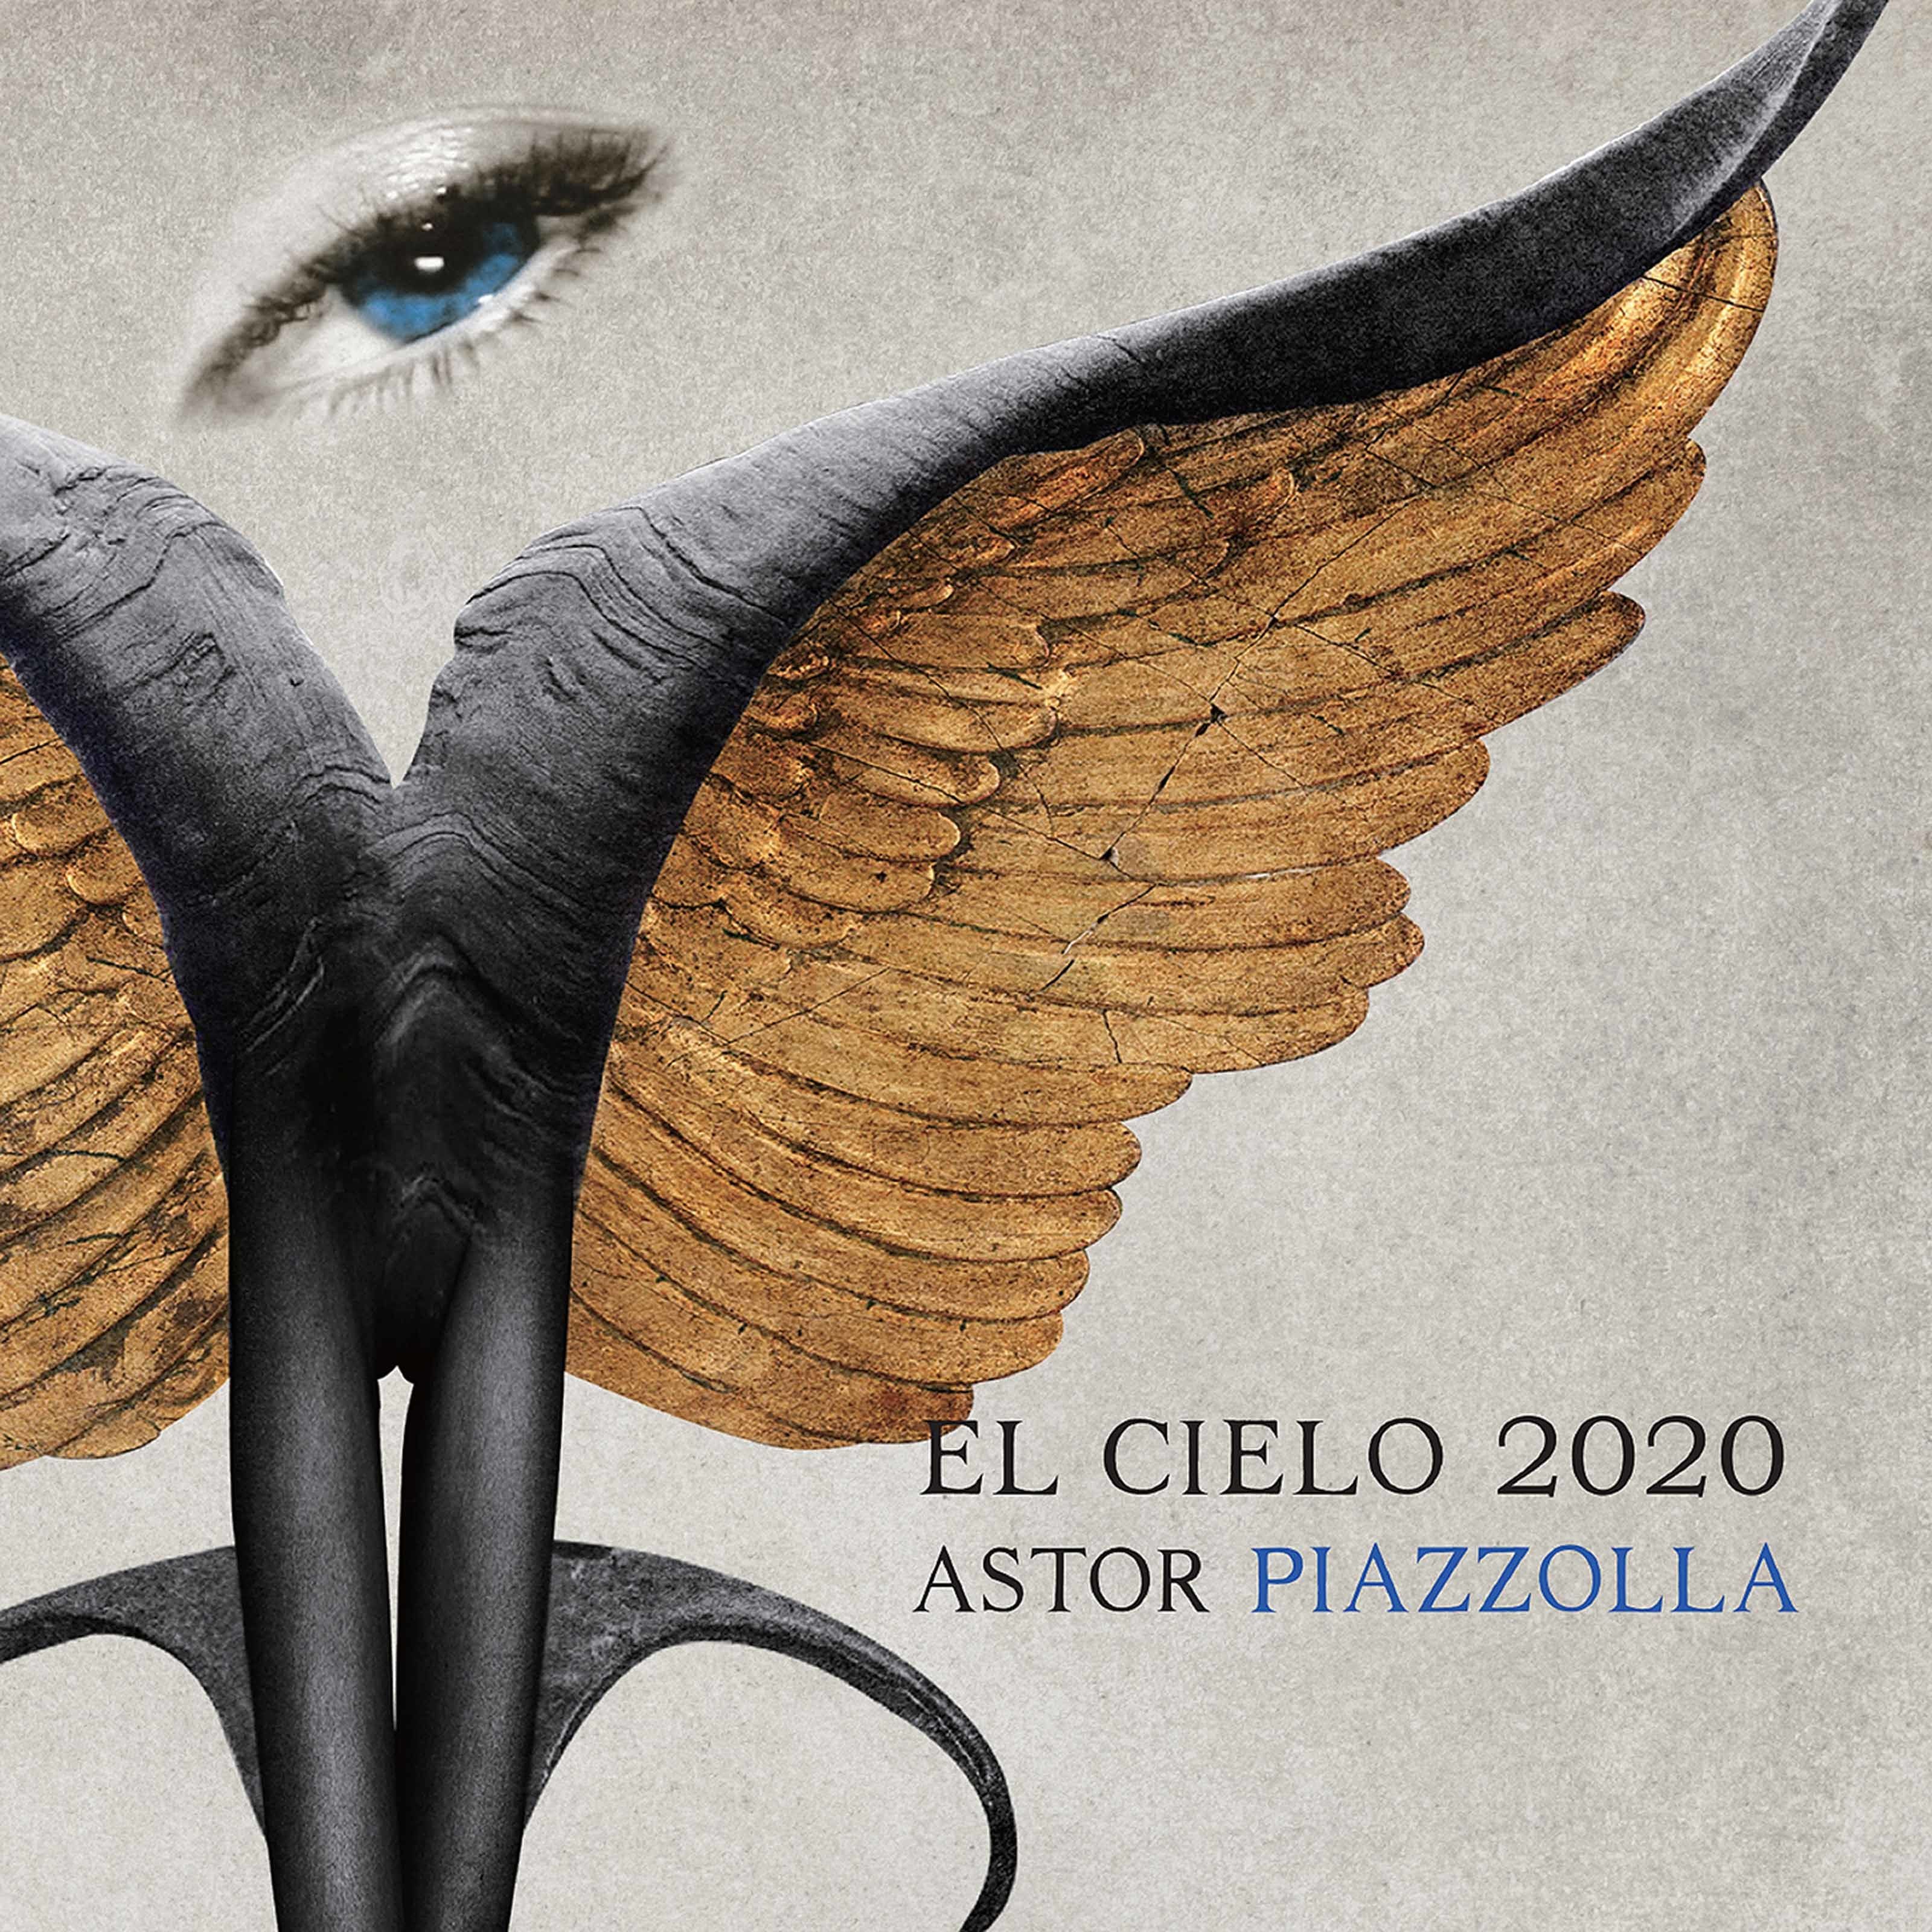 El Cielo 2020 - Piazzolla: Chamber Music (Arr. for Strings & Piano) (2020) [FLAC 24bit/96kHz]